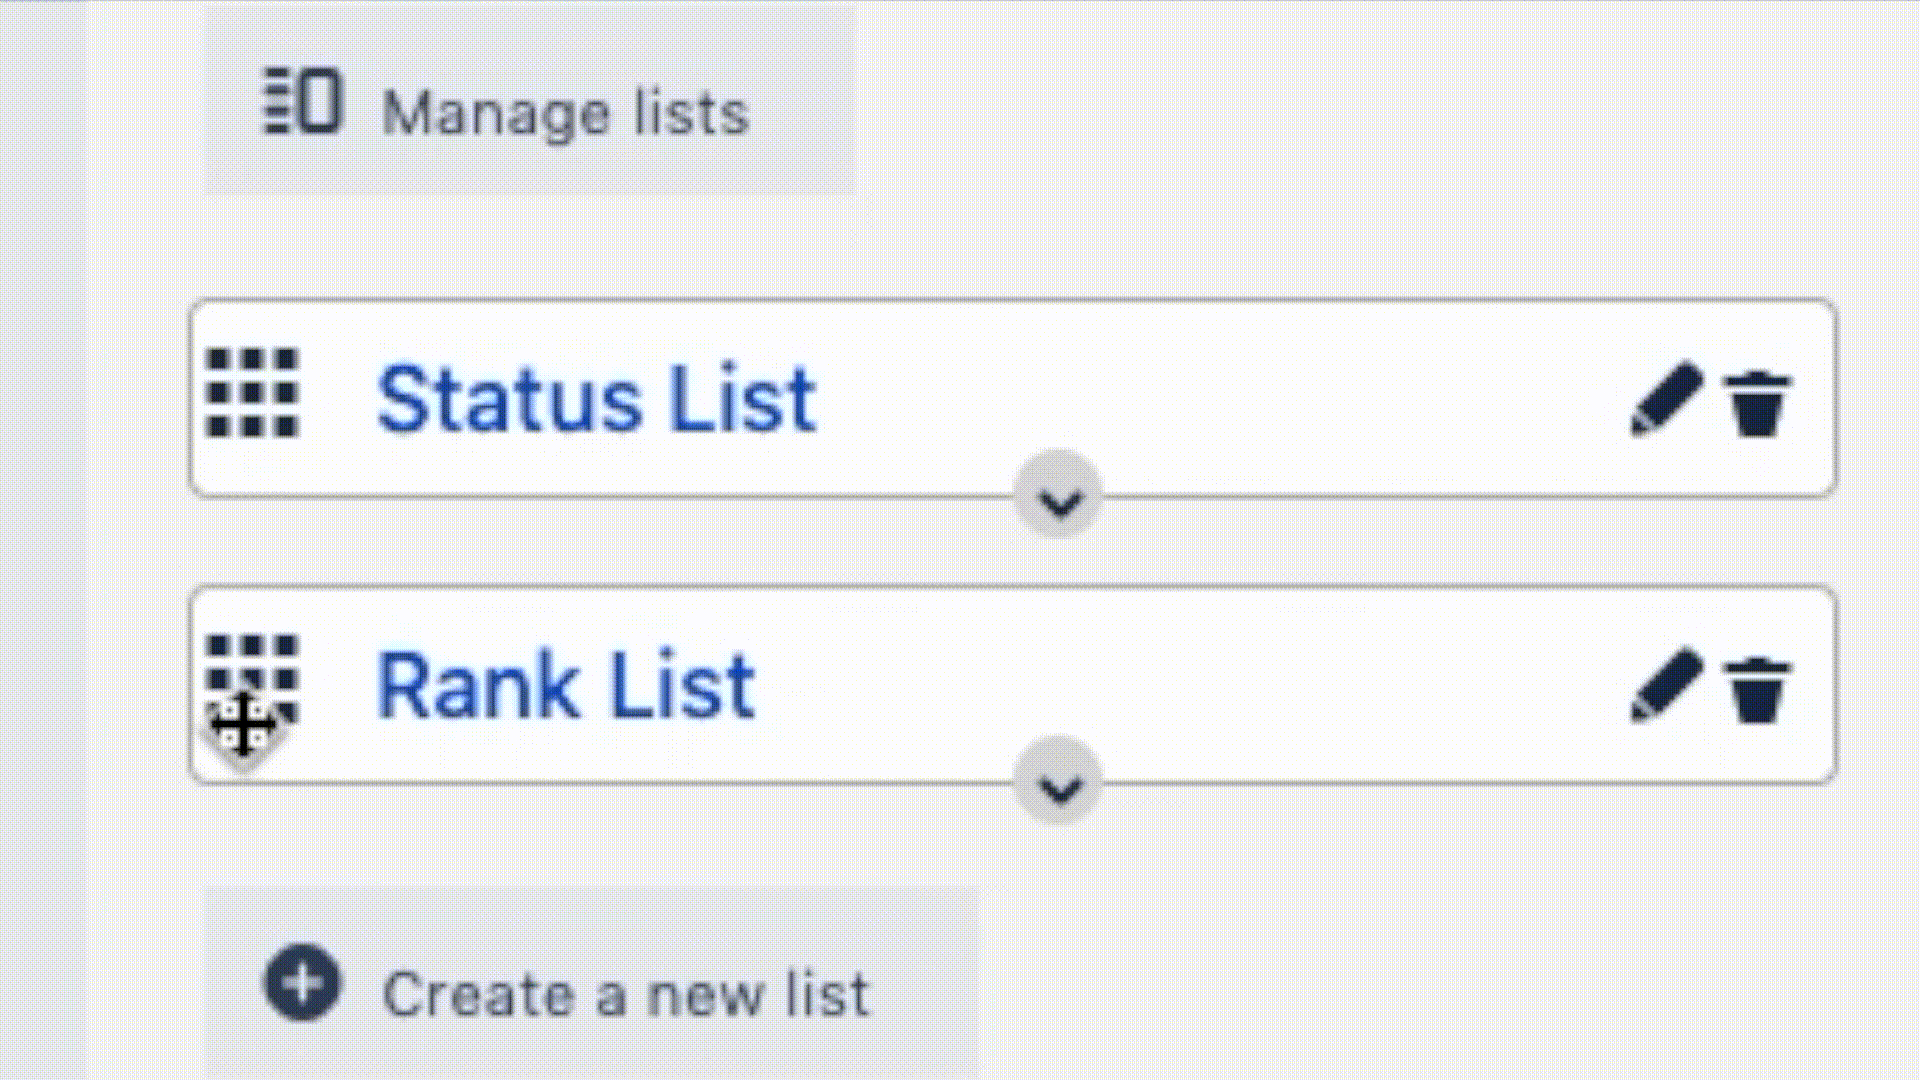 Organize lists by drag and drop